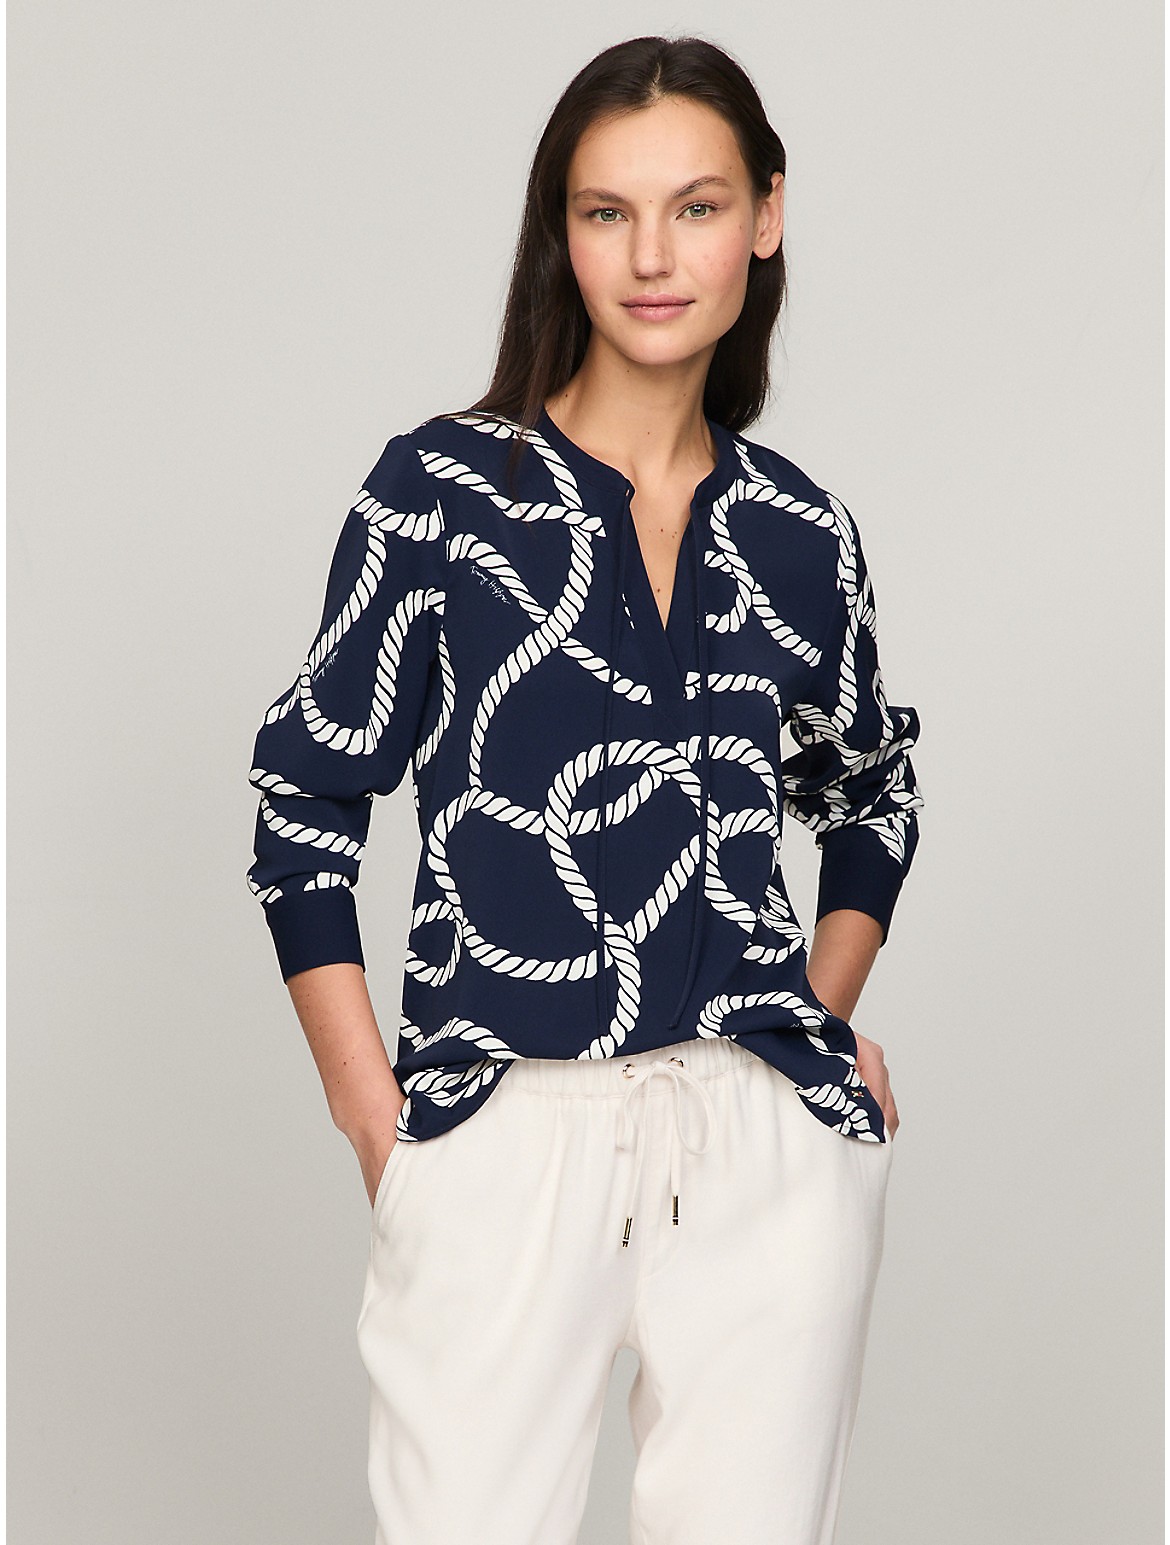 Tommy Hilfiger Women's Nautical Rope Print Pullover Top